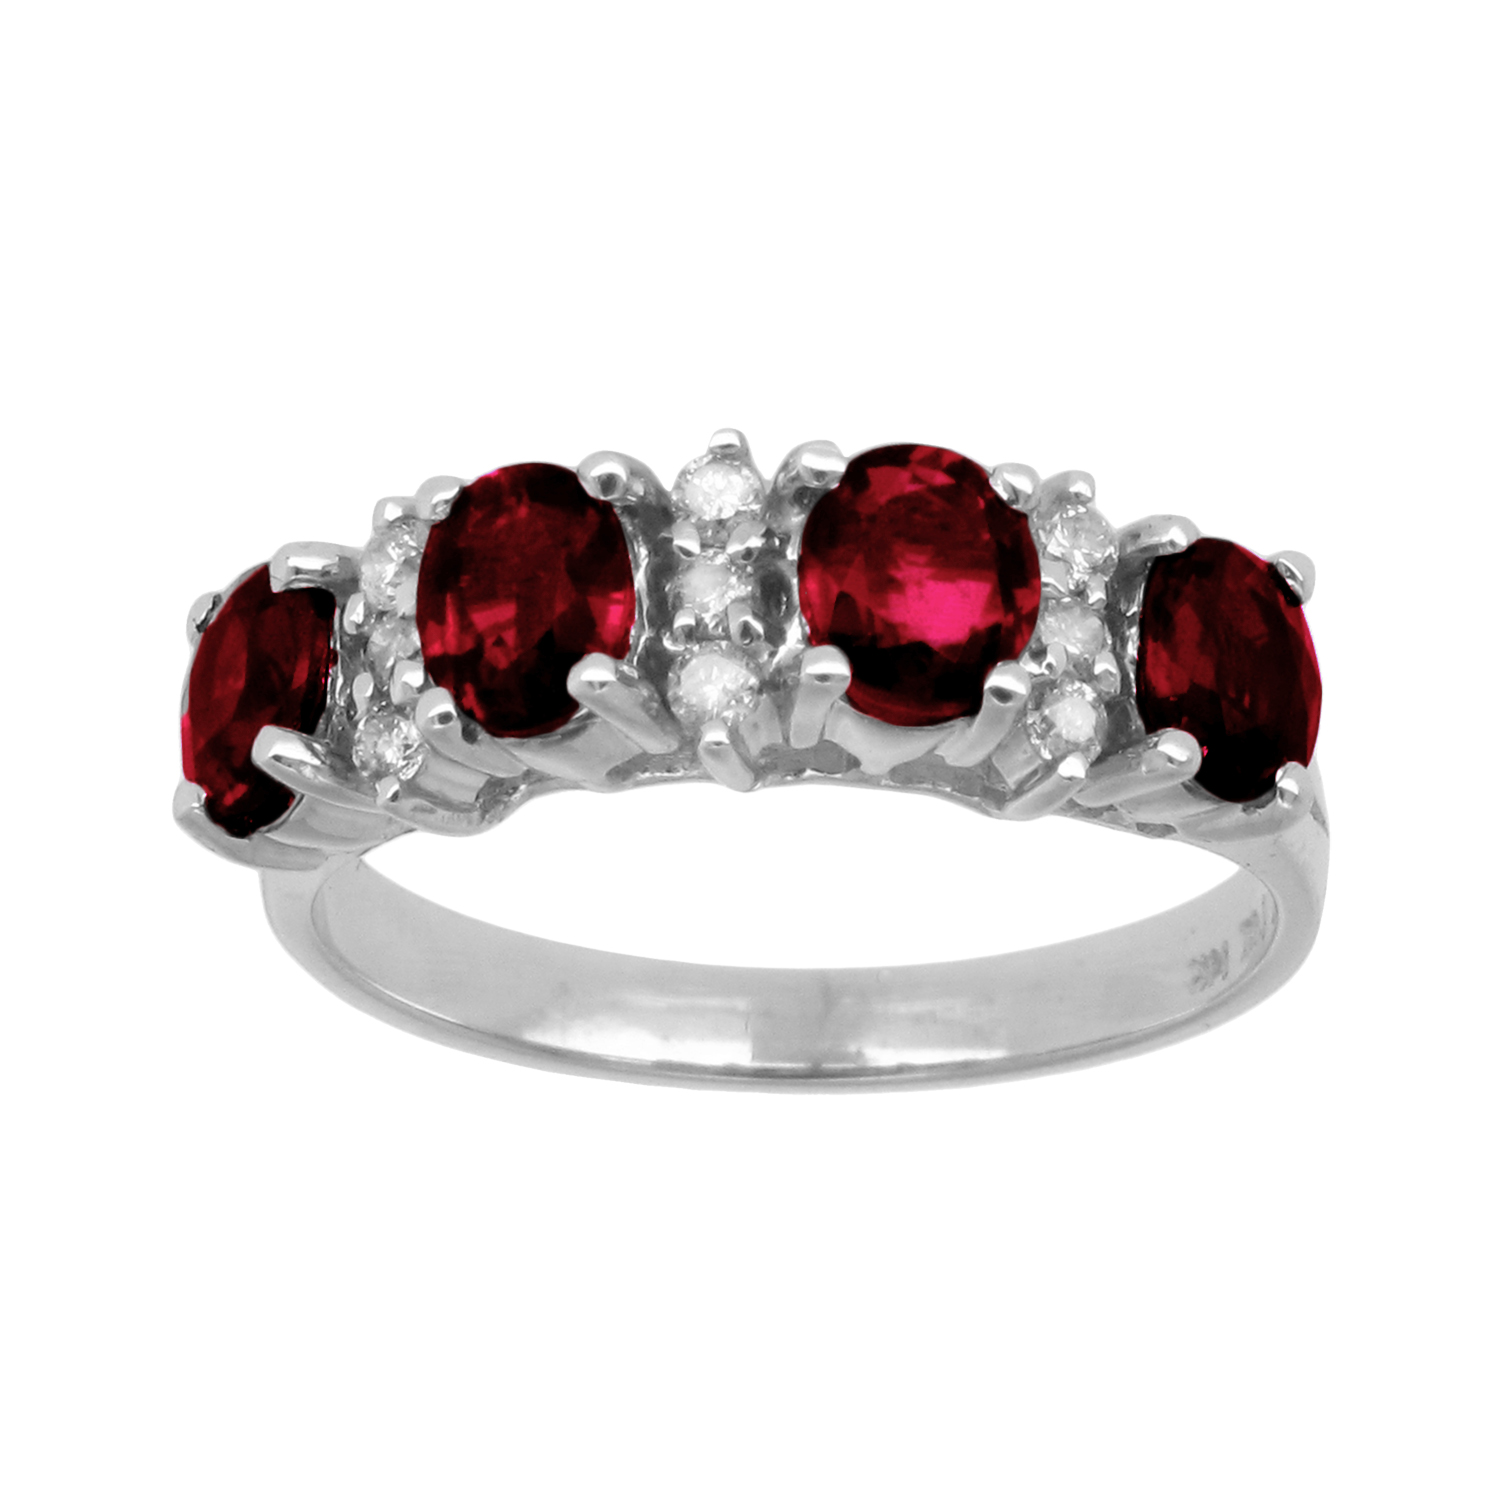 View 1.69cttw Natural Heated Ruby and Diamond Fashion Band set in 14k Gold 